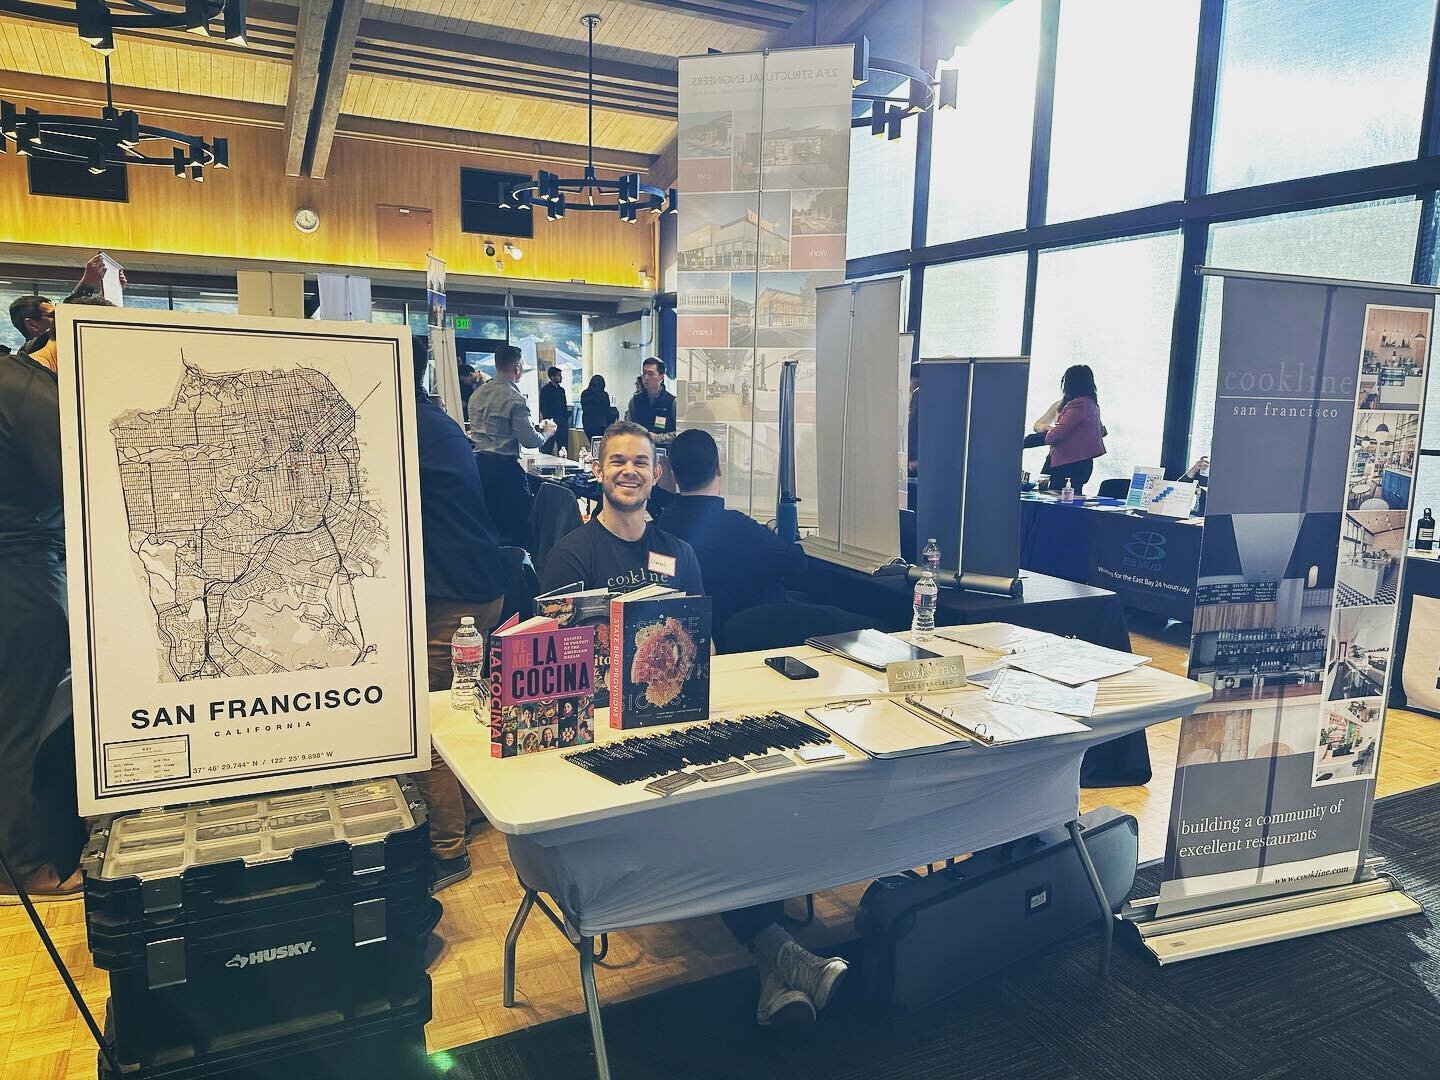 After 3 long years‼️we're finally back on the career fair circuit! Daniel and Kathleen are repping @cooklinesf at the Civil Engineering, Sustainable Design, and Construction Management Fair @stanford tonight! 🙌🙌🙌

Who wants to bet that no other GC